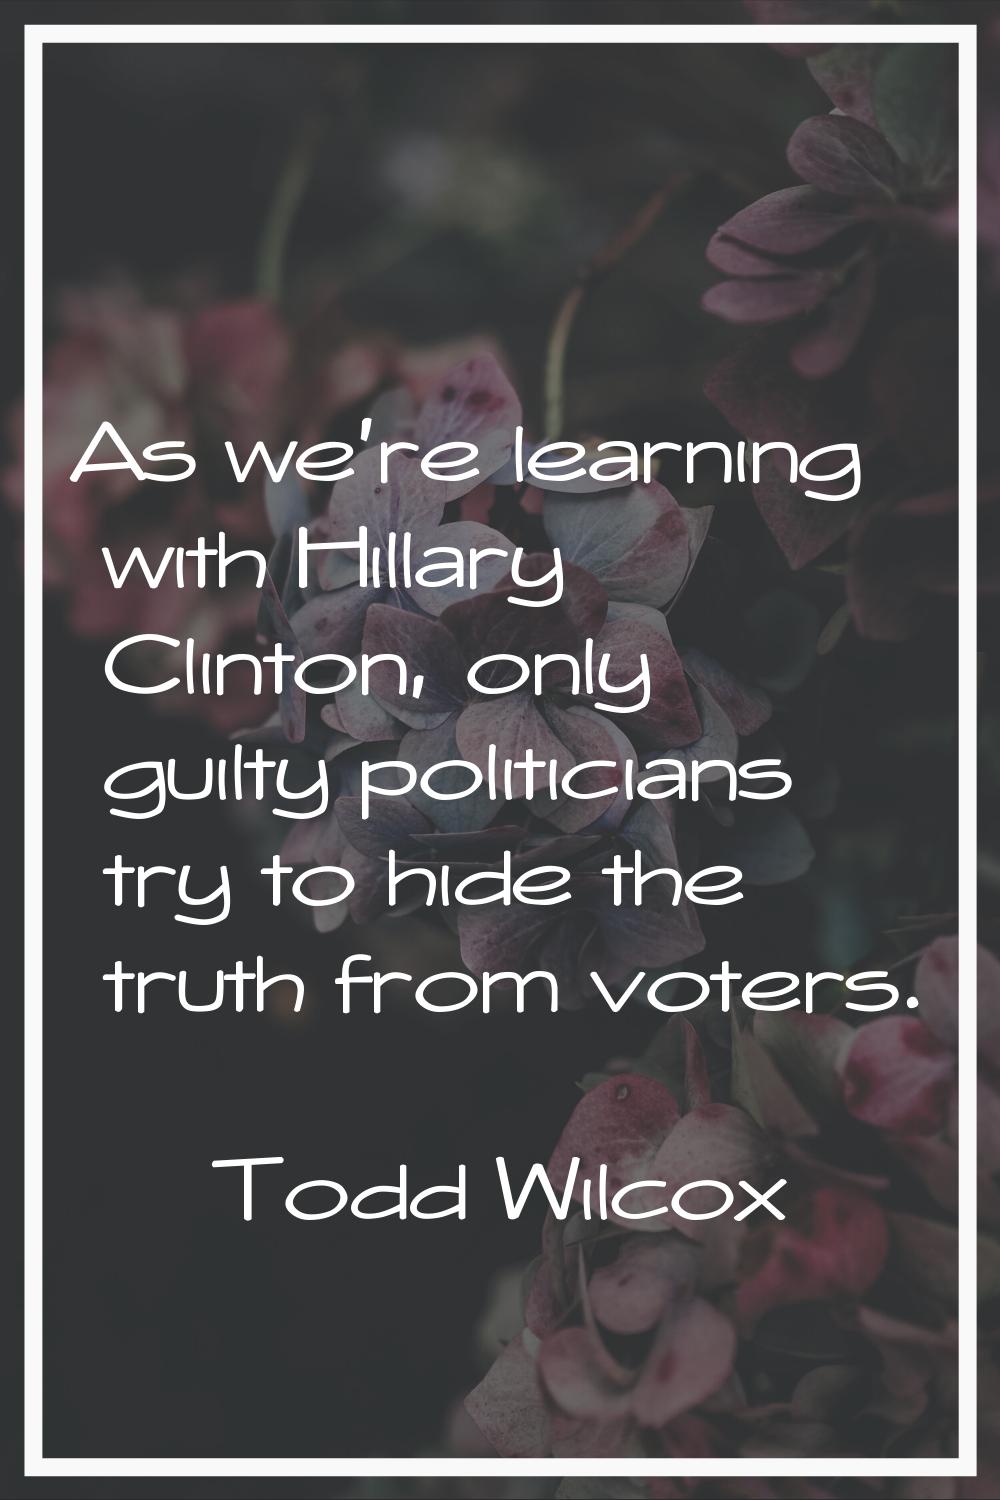 As we're learning with Hillary Clinton, only guilty politicians try to hide the truth from voters.